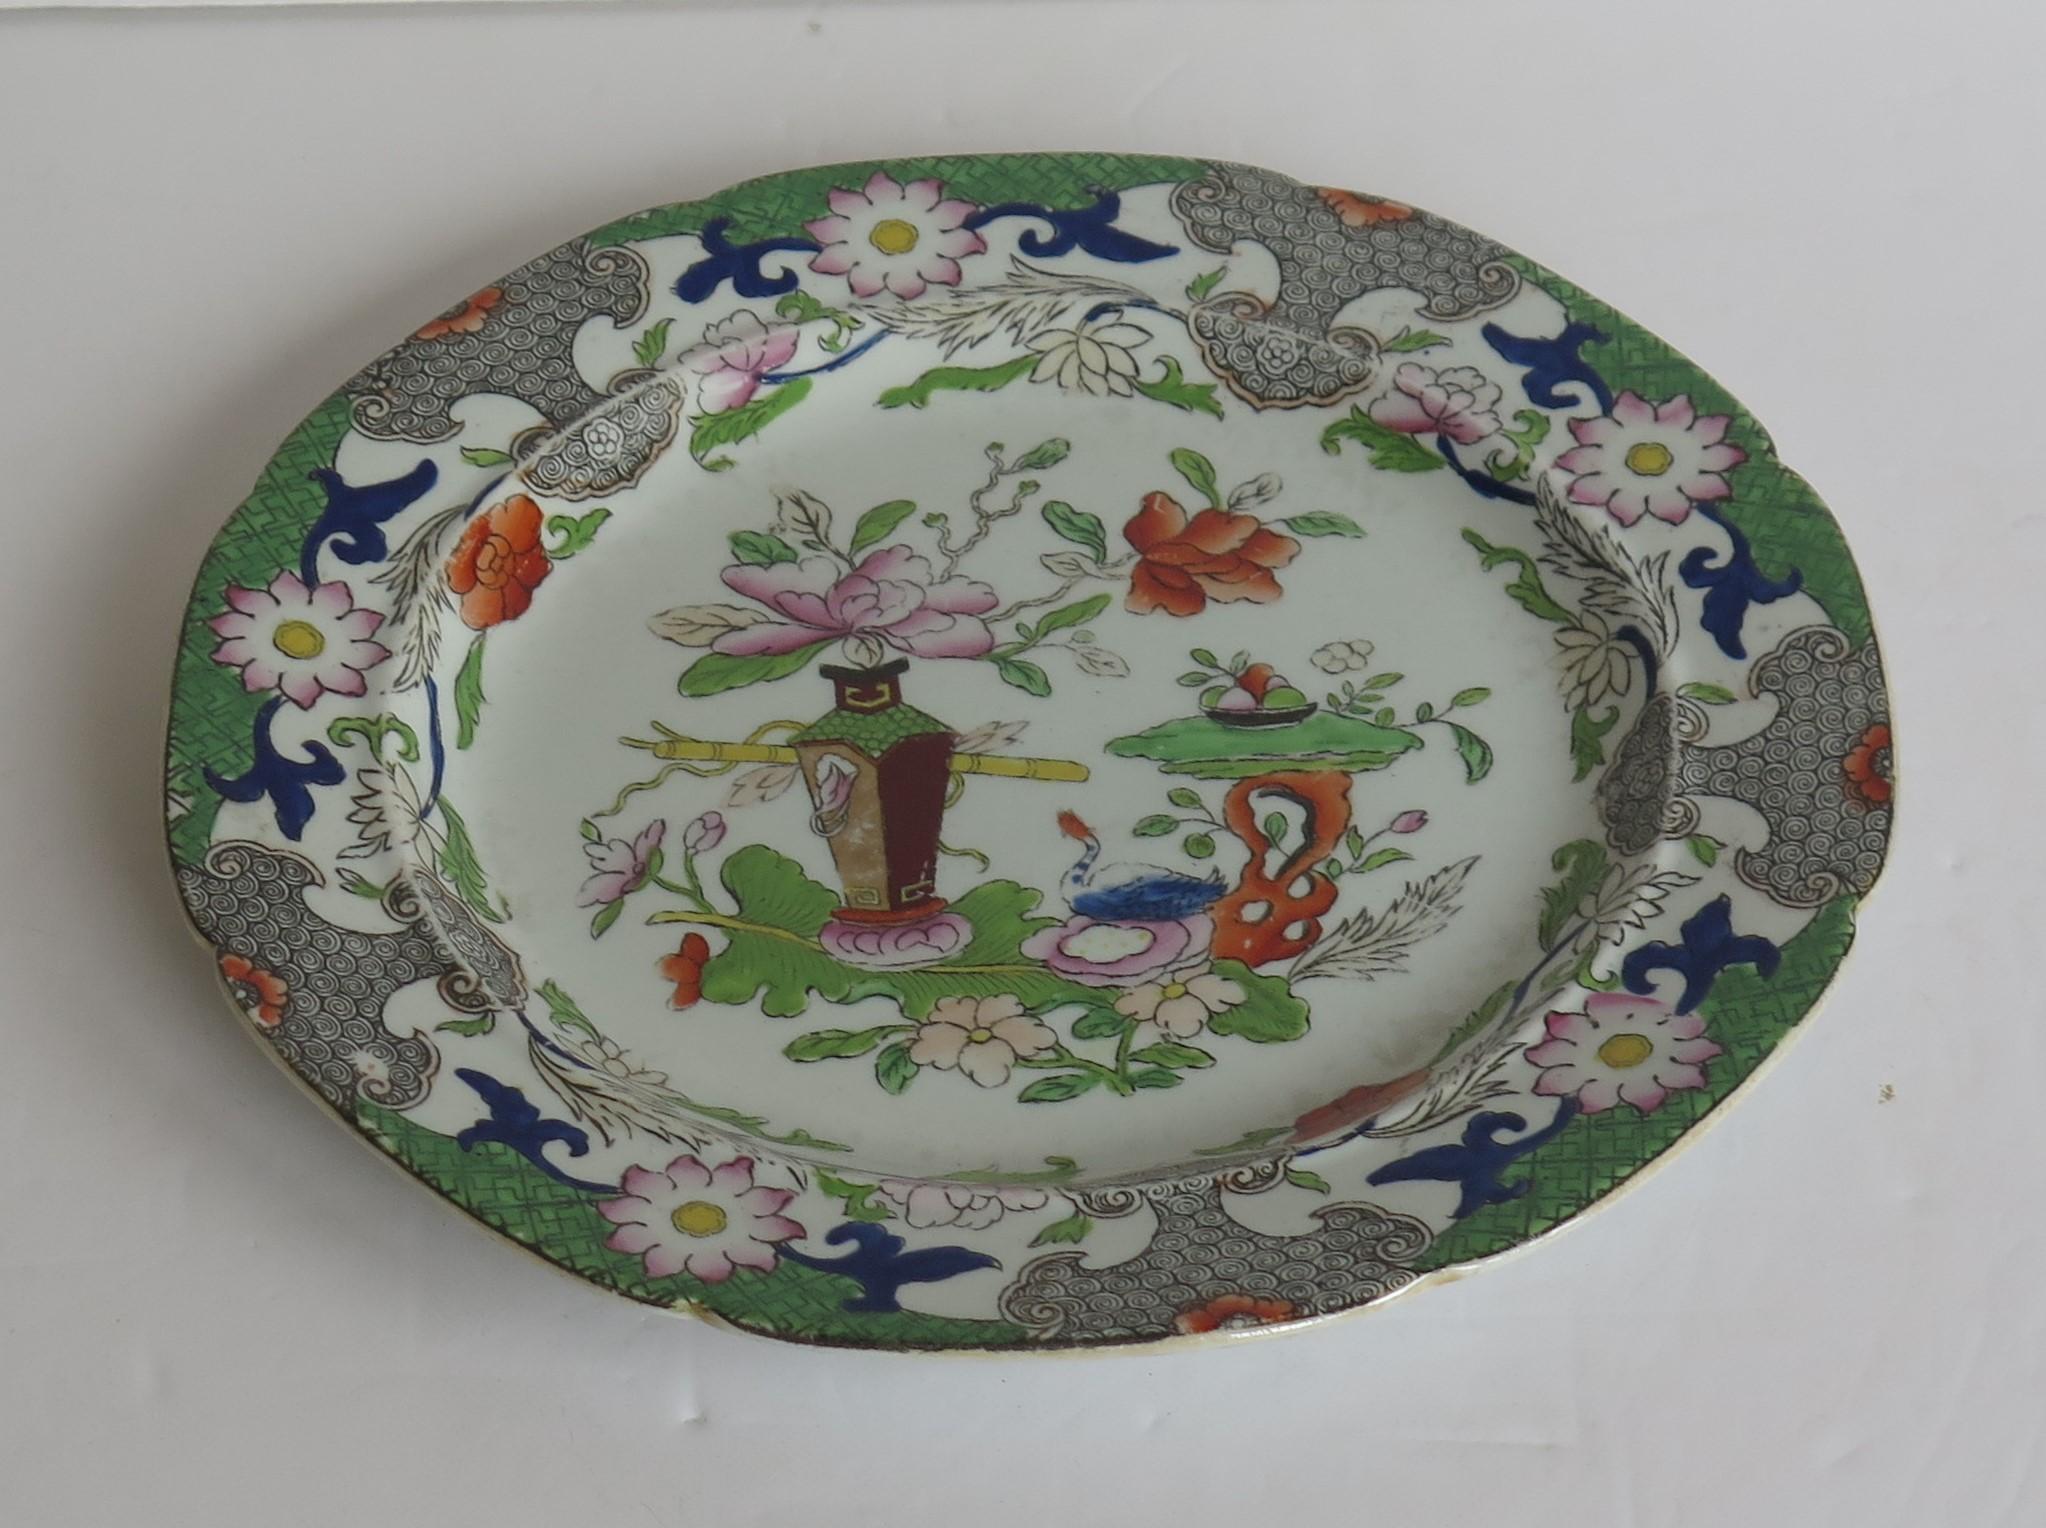 This is a hand-painted Mason's ironstone side plate, in the Table and Flower pot gilded pattern, from their earliest George 3rd period, circa 1818. 

This plate is well painted in the Chinoiserie pattern called the Table and Flower Pot pattern,